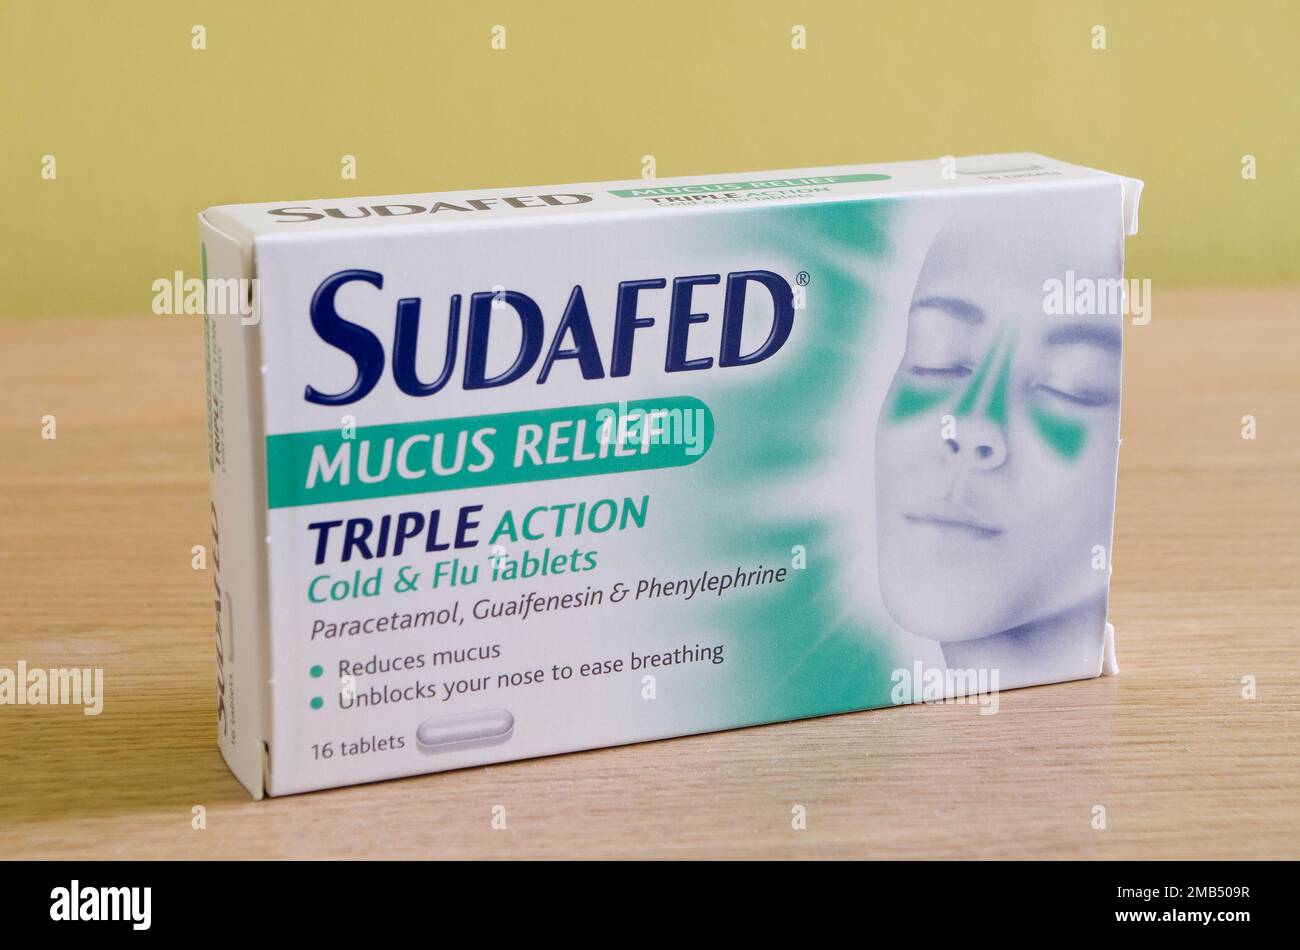 Sudafed Mucus Relief Cold and Flu Tablets Stock Photo